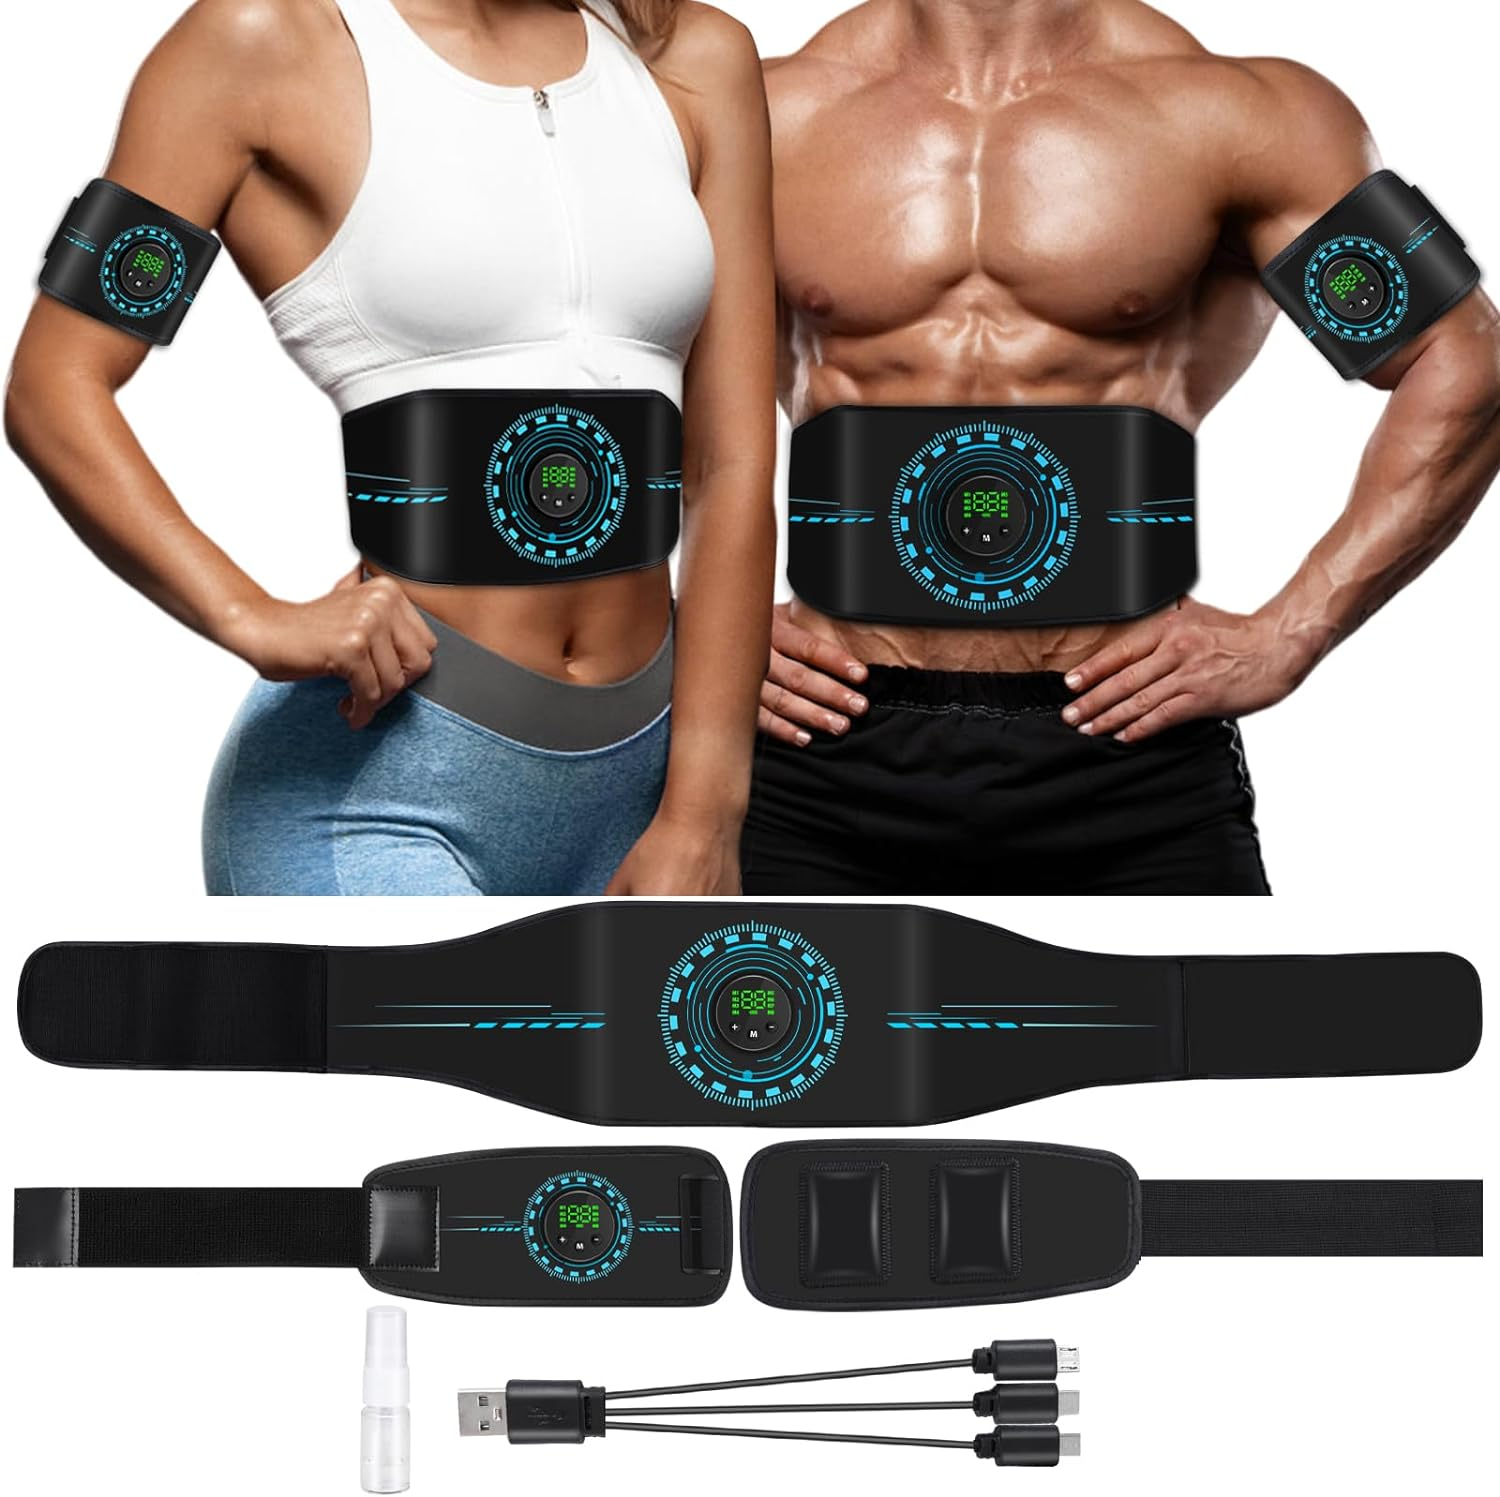 LESOFI 3 Pack Abs Stimulator, Abdomen Exerciser, Abs Machine for Abdomen/Arm/Leg, ABS Workout Equipment for Muscle Growth with 8 EMS Modes, 25 Levels of Intensity Black